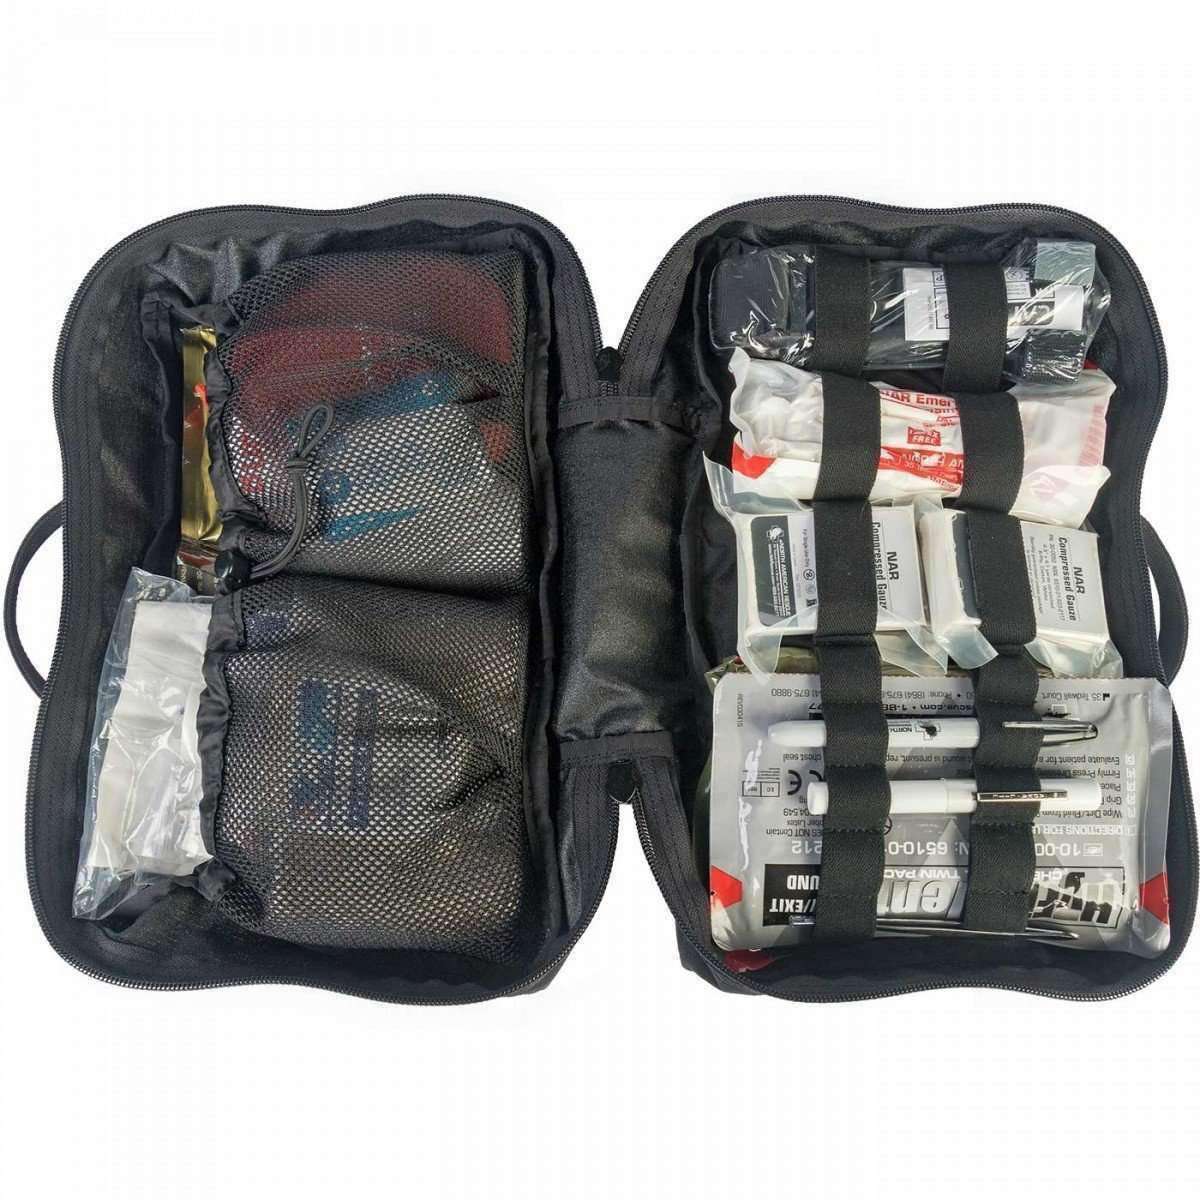 Vehicle Tactical First Aid Kits - MED-TAC International Corp.